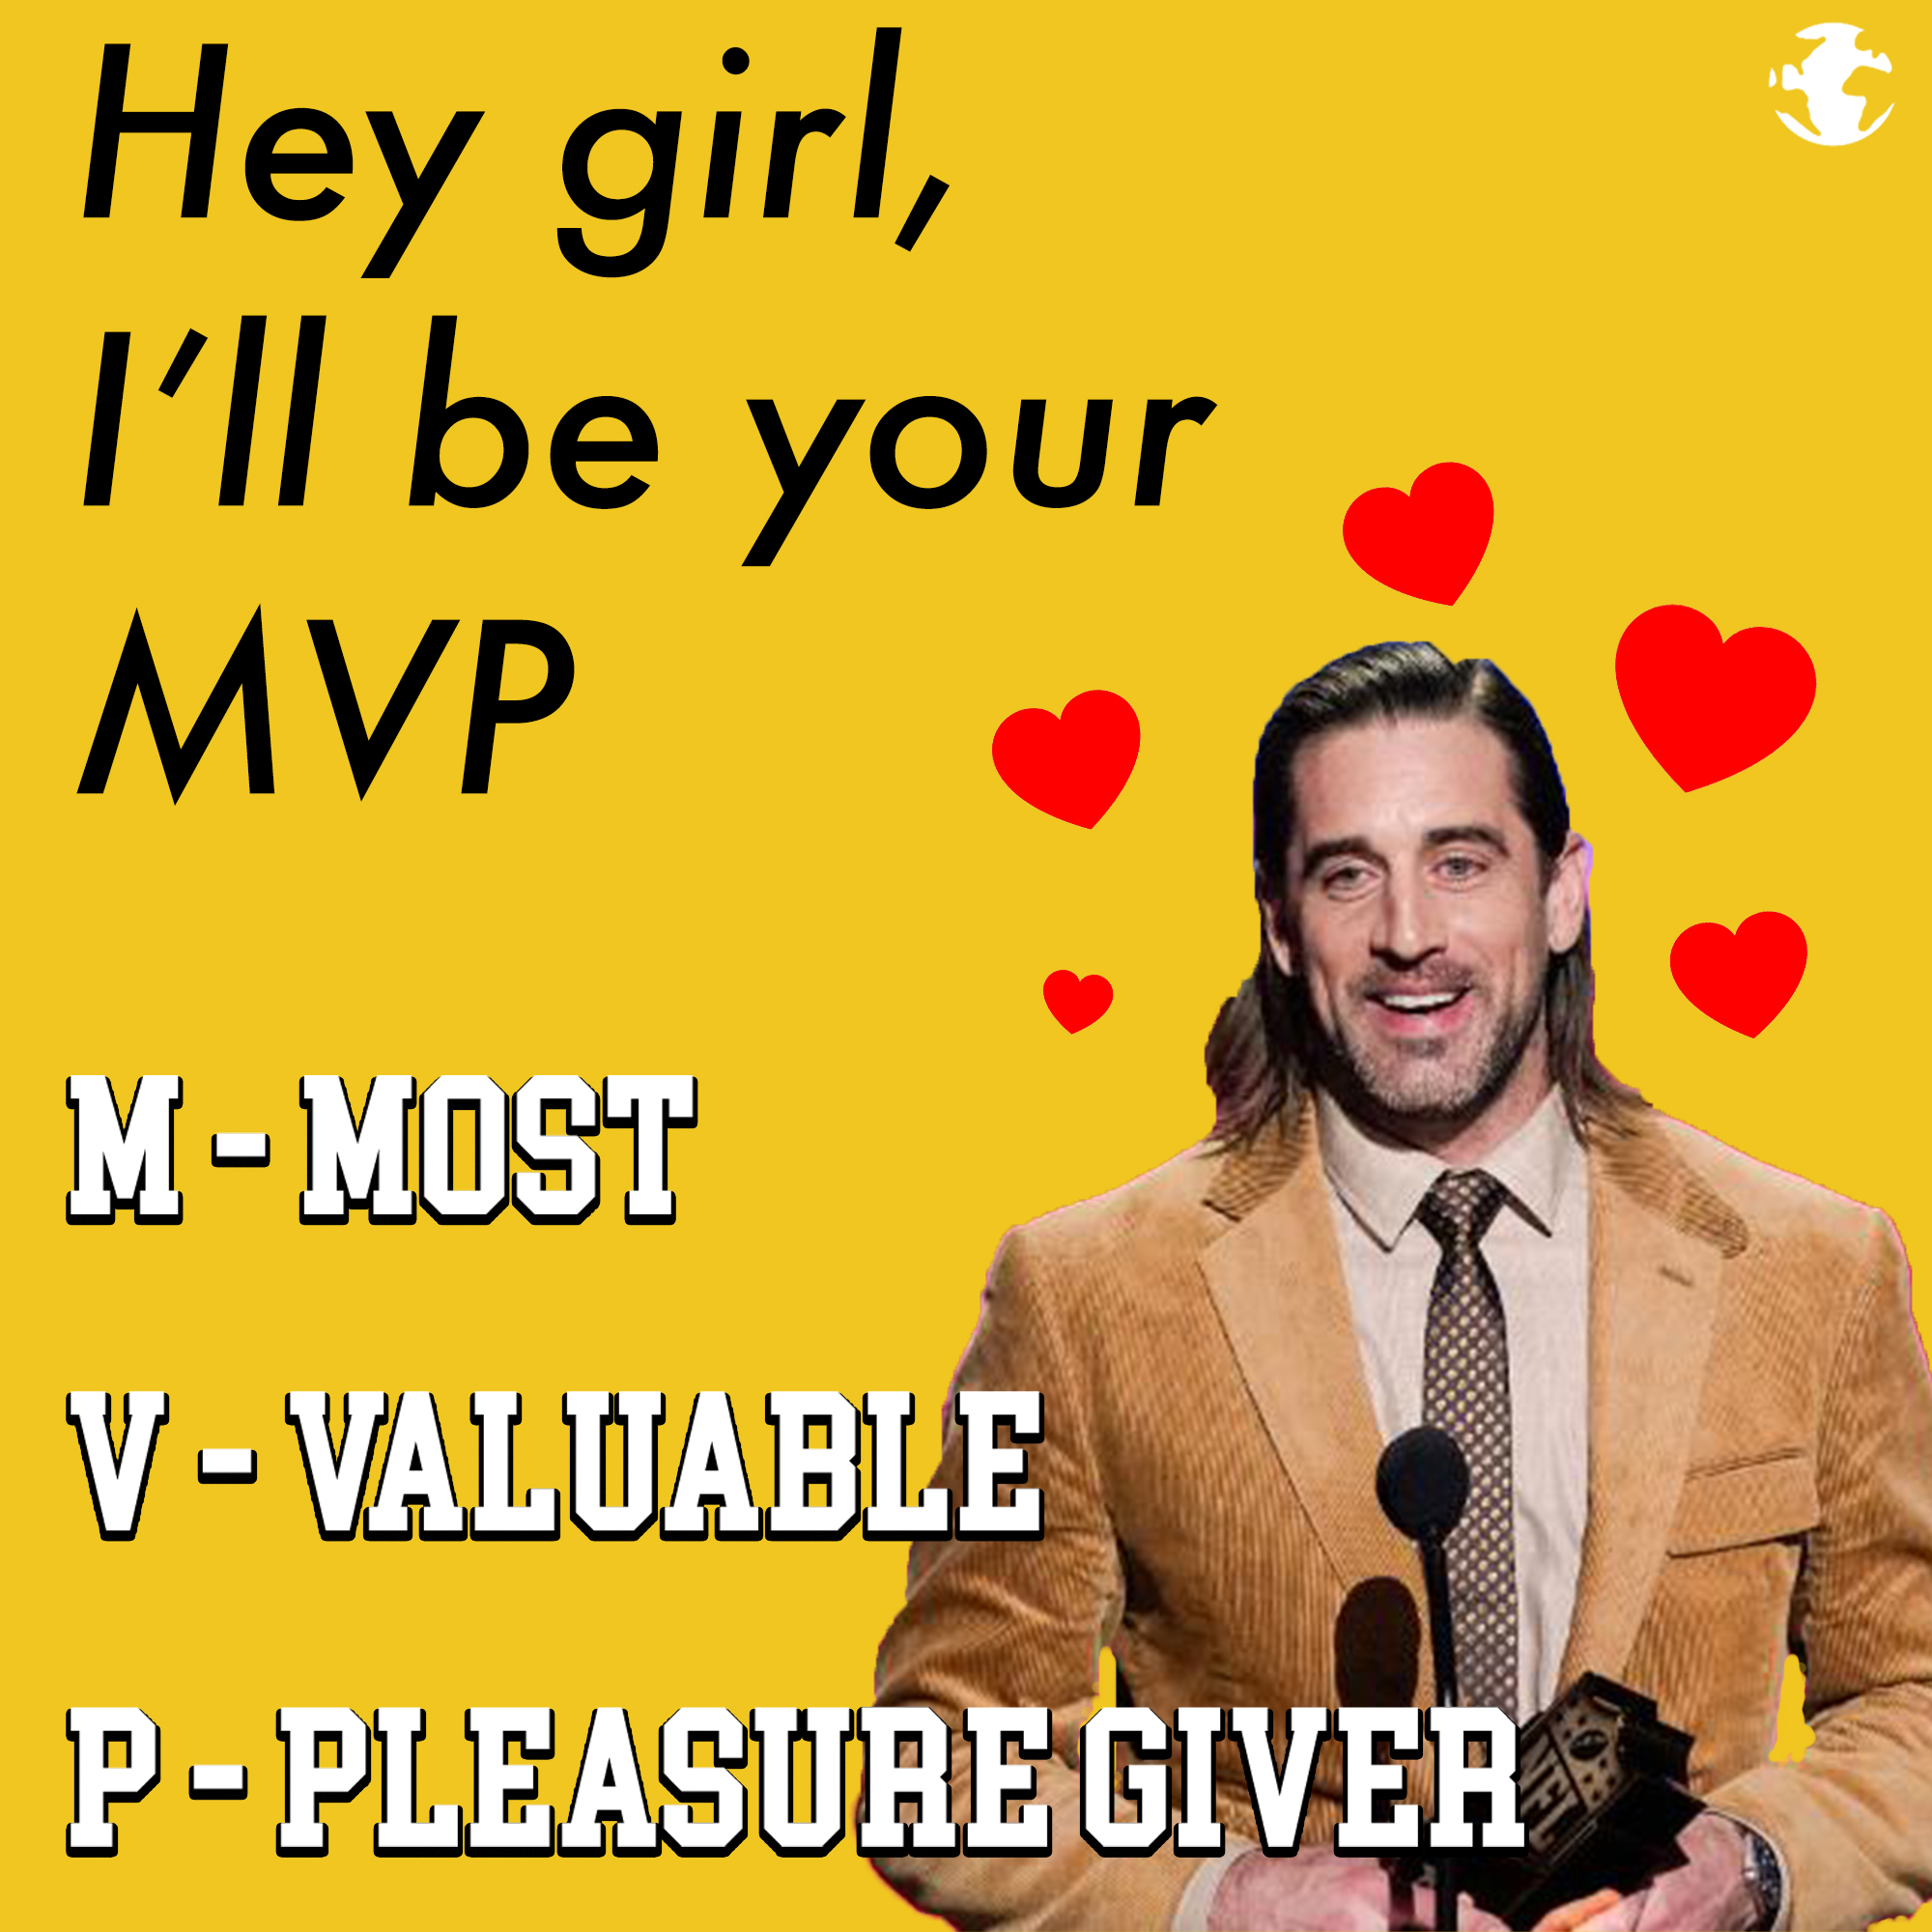 eBaum's Valentine's Day Cards 2022 - can t do this anymore - Hey girl, I'll be your Mvp MMost VValuable PPleasure Giver